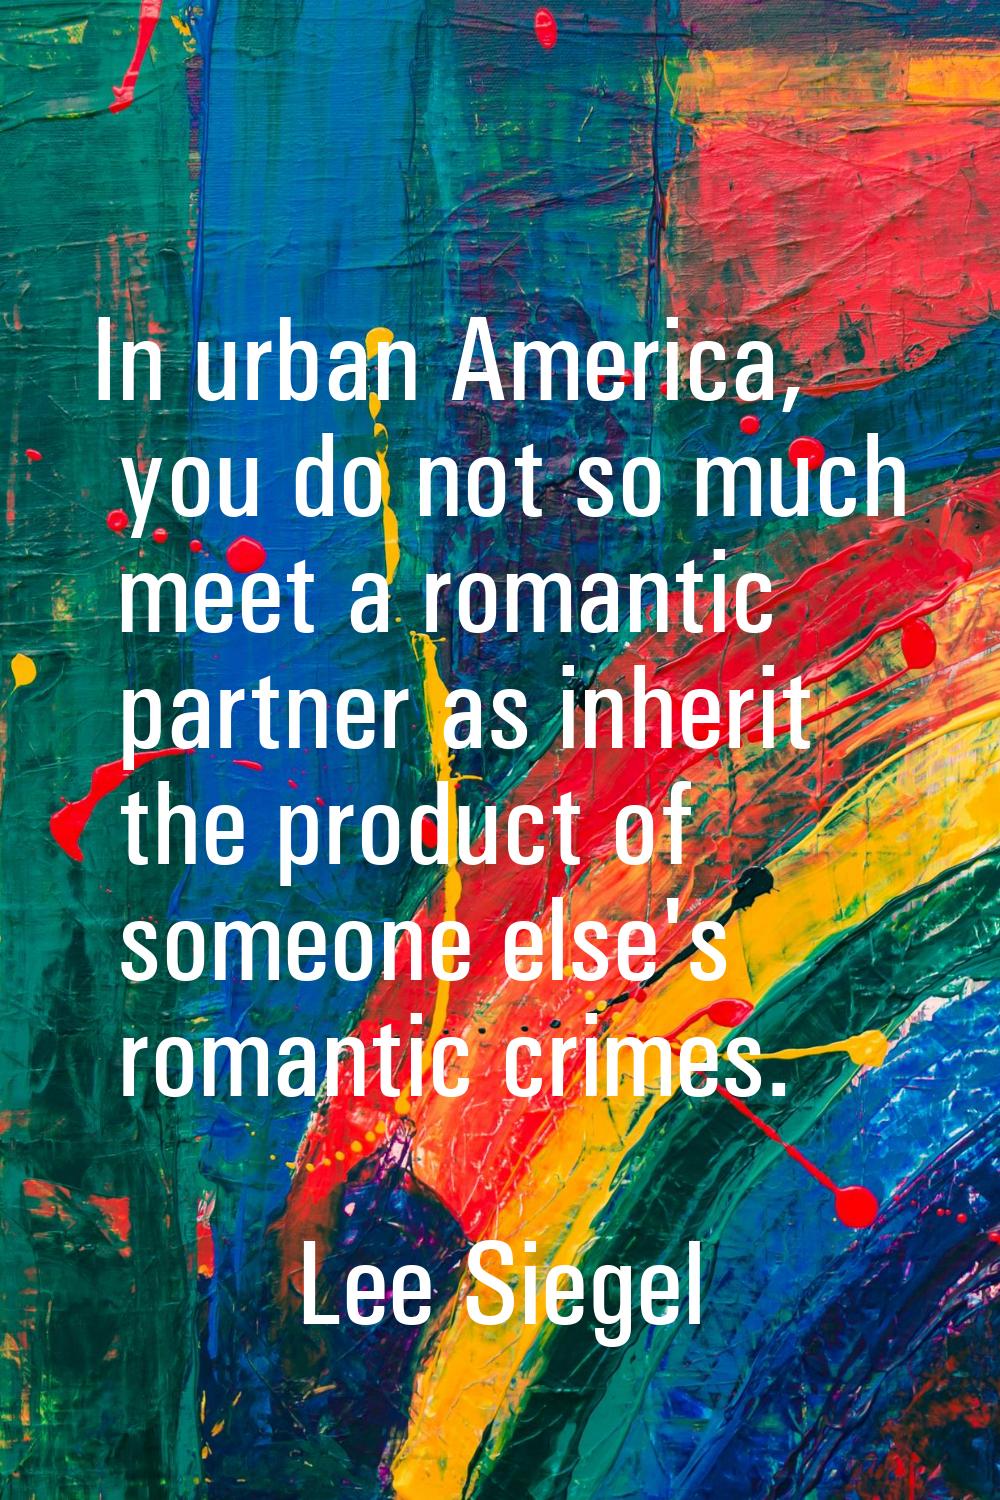 In urban America, you do not so much meet a romantic partner as inherit the product of someone else